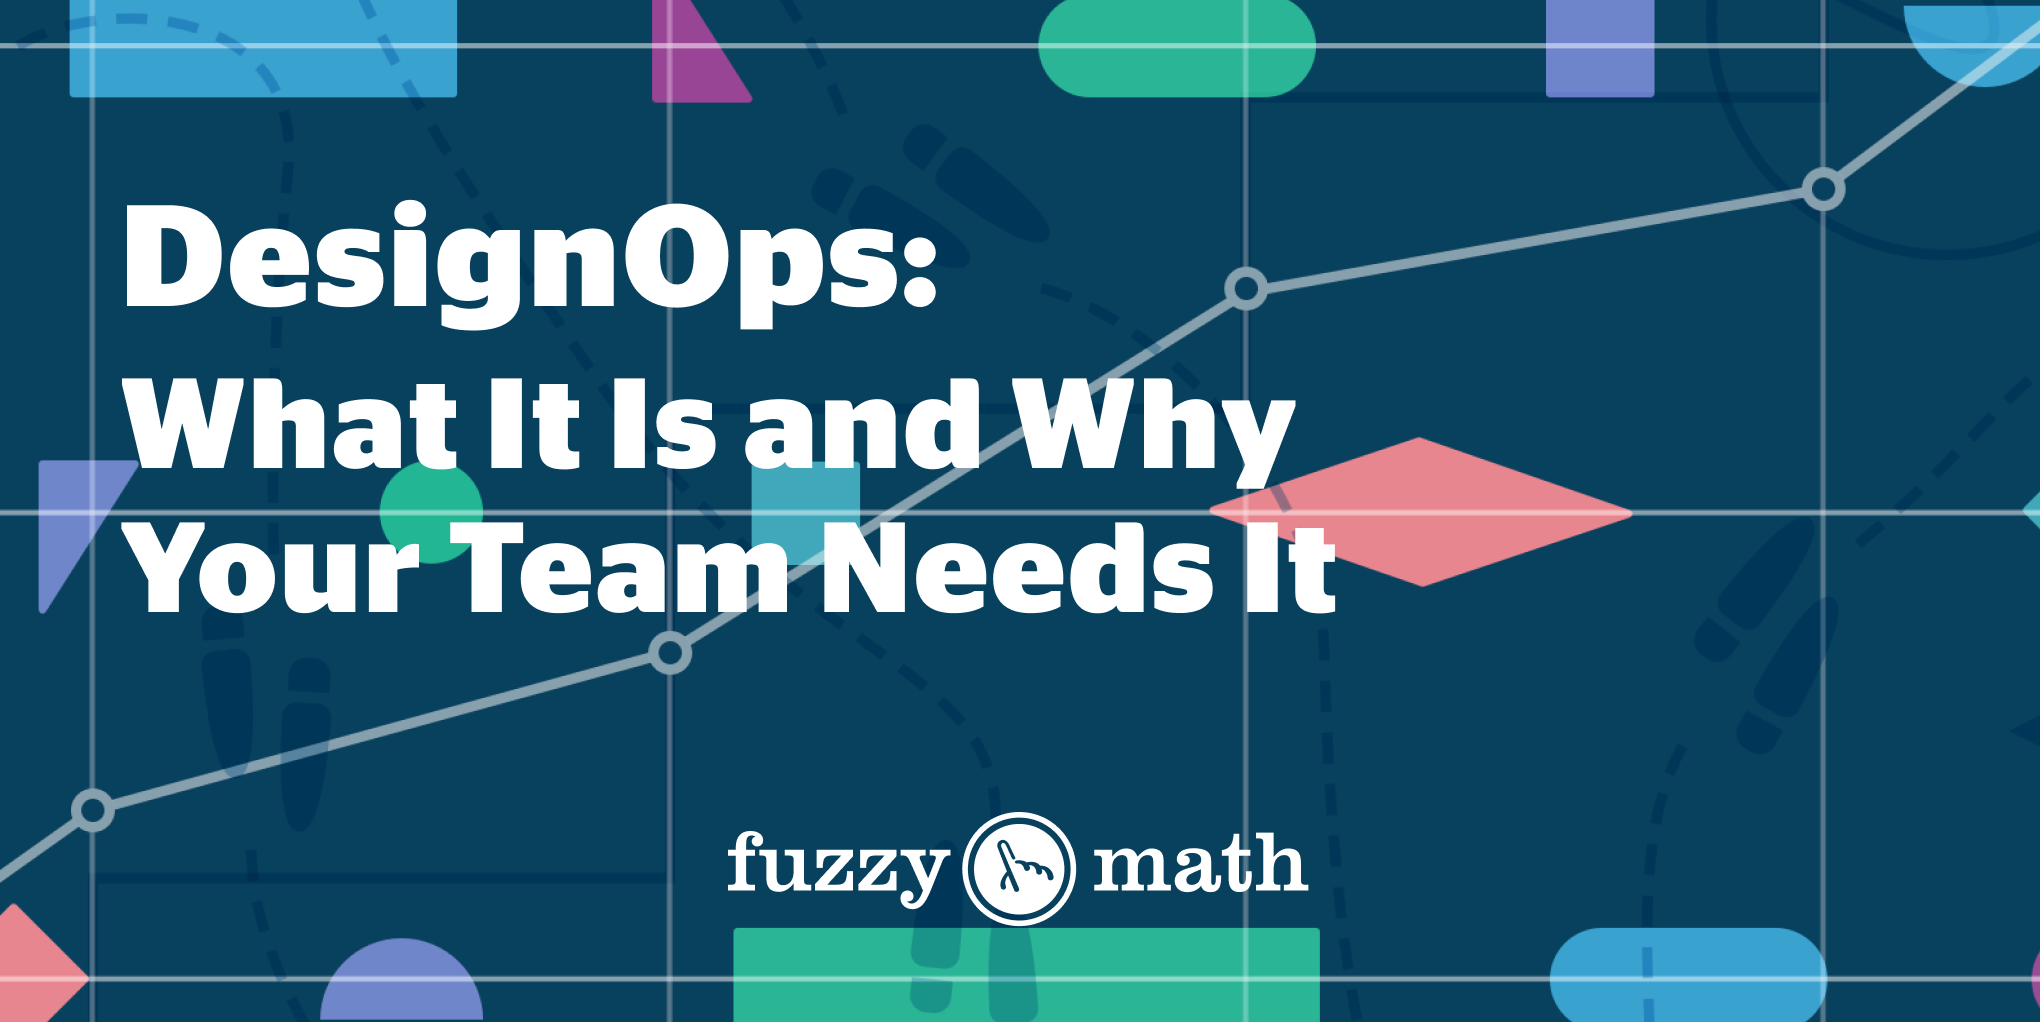 The article title - "design ops, what it is and why your team needs it". Overlayed on a grid with different color shapes and graphs to denote operations at an organization.